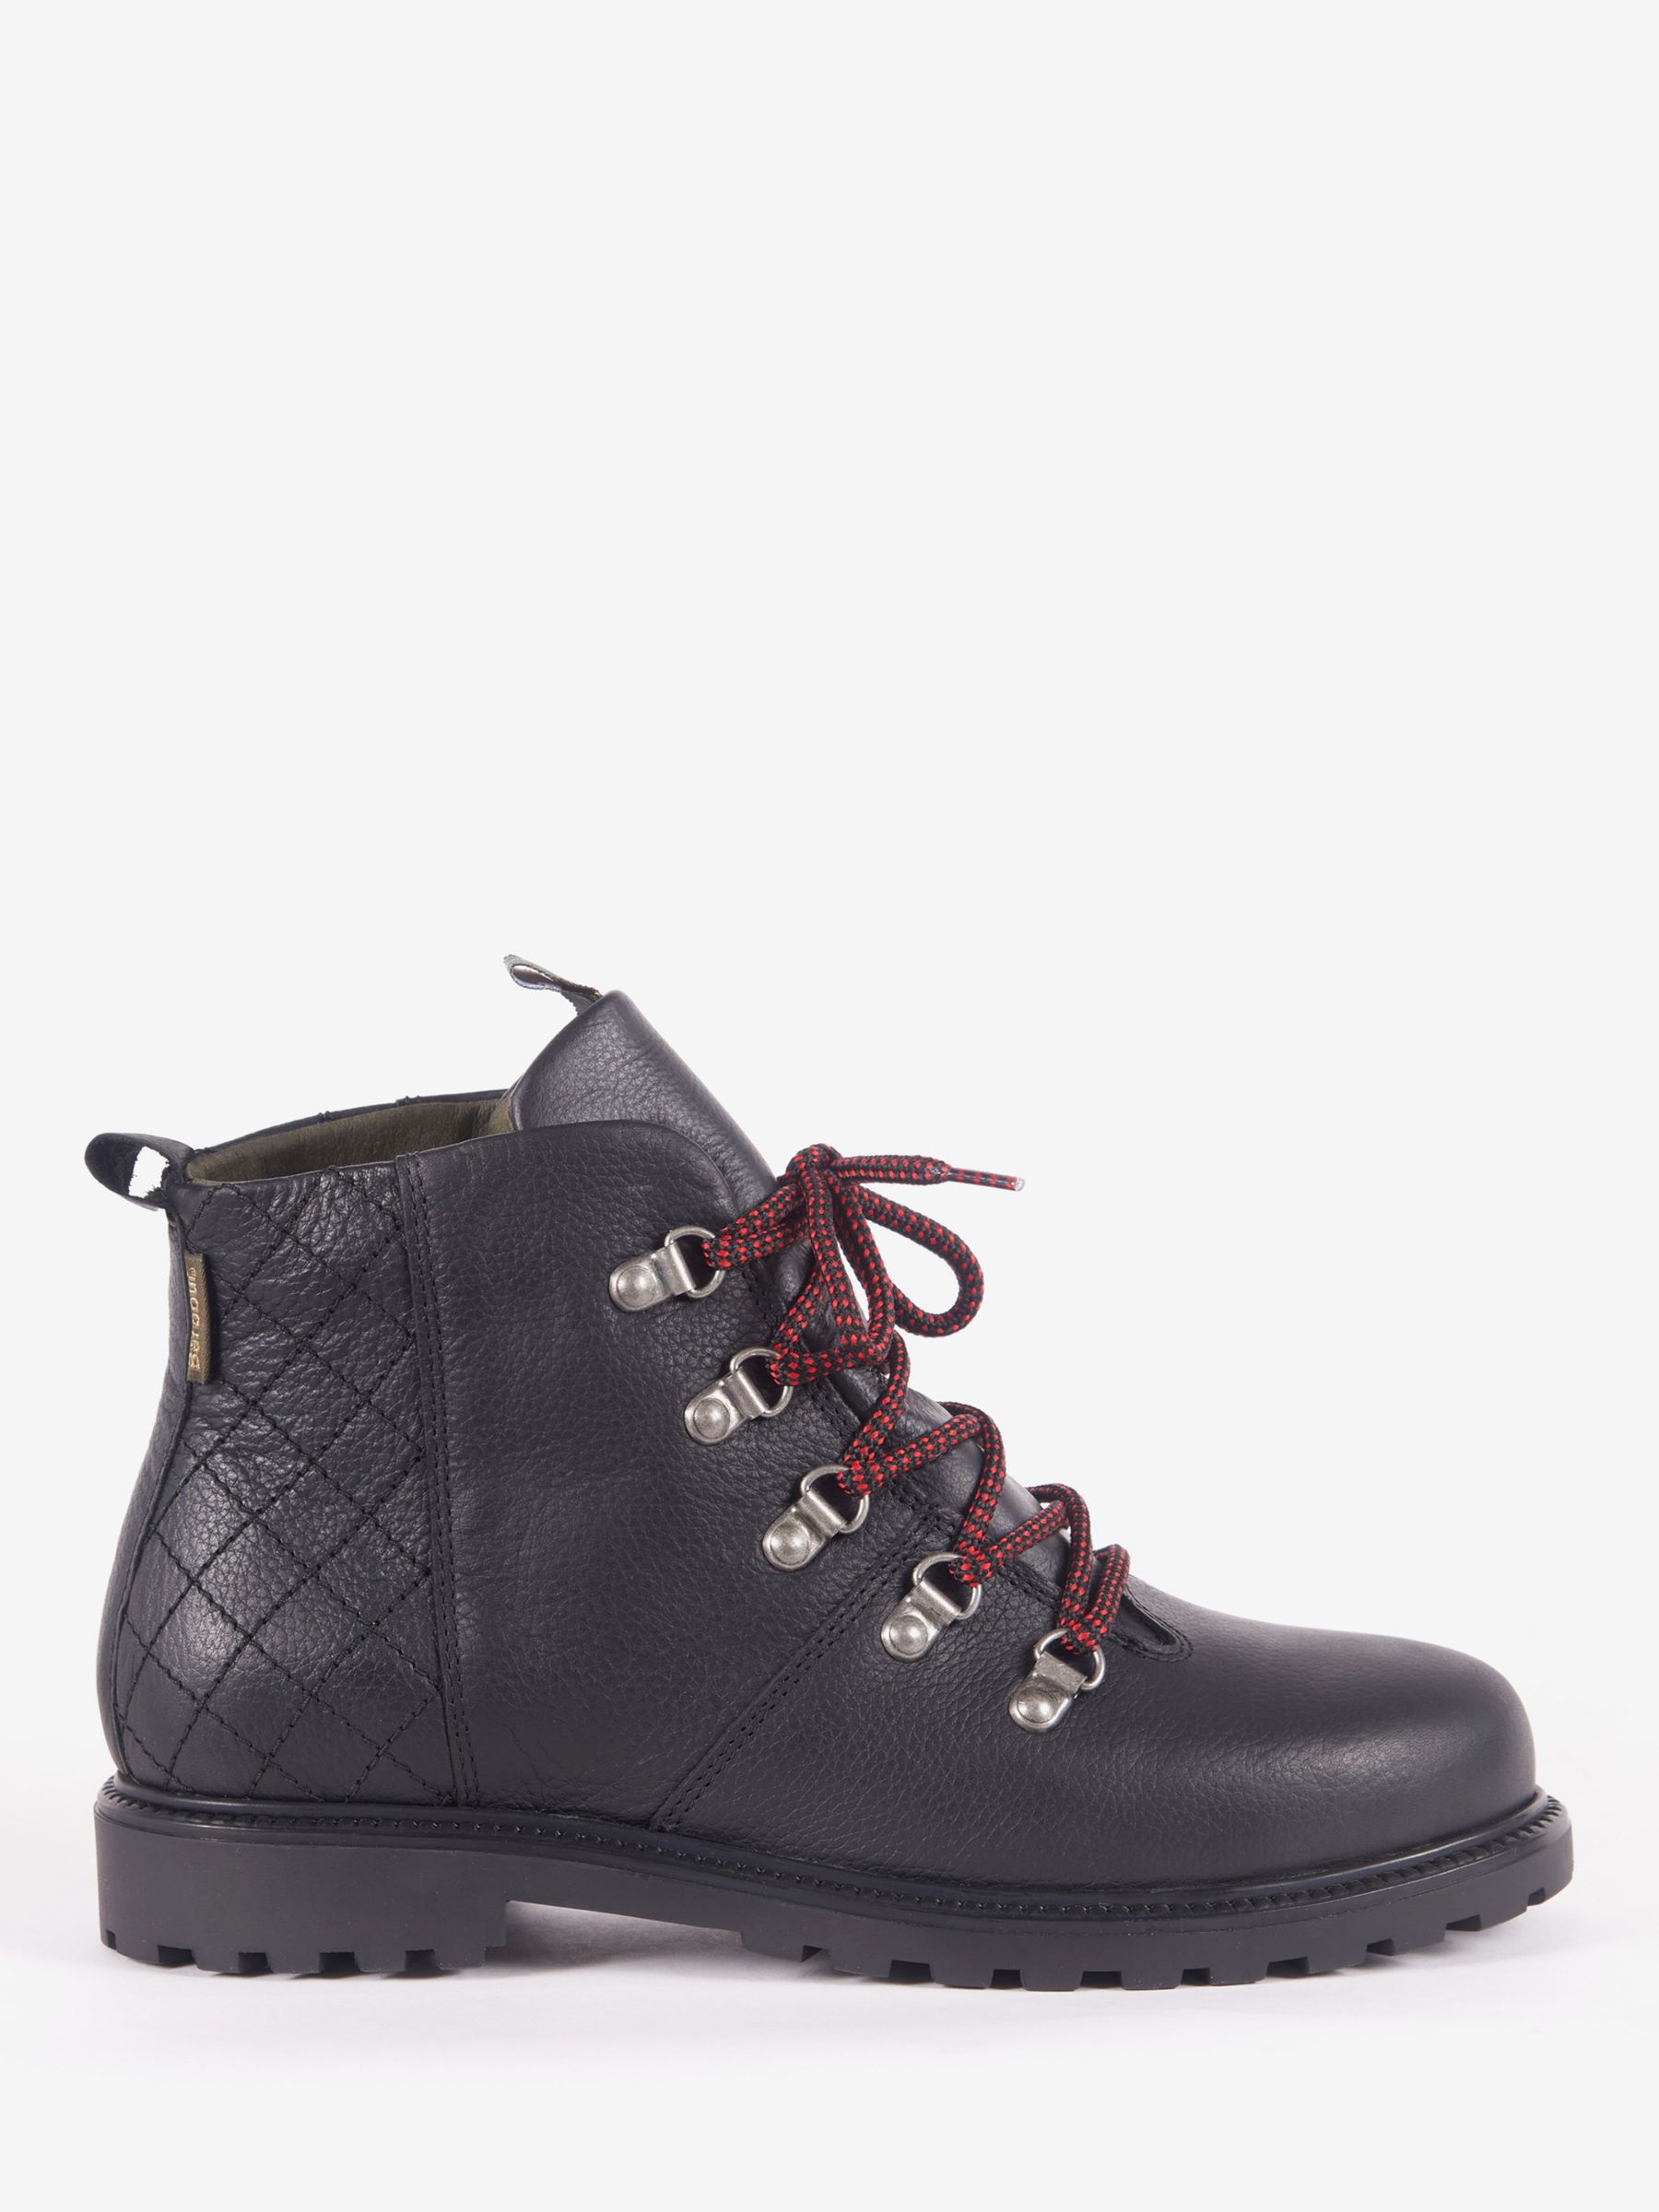 Ugle Sommetider Lover Barbour Keswick Leather Waterproof Ankle Boots, Black at John Lewis &  Partners